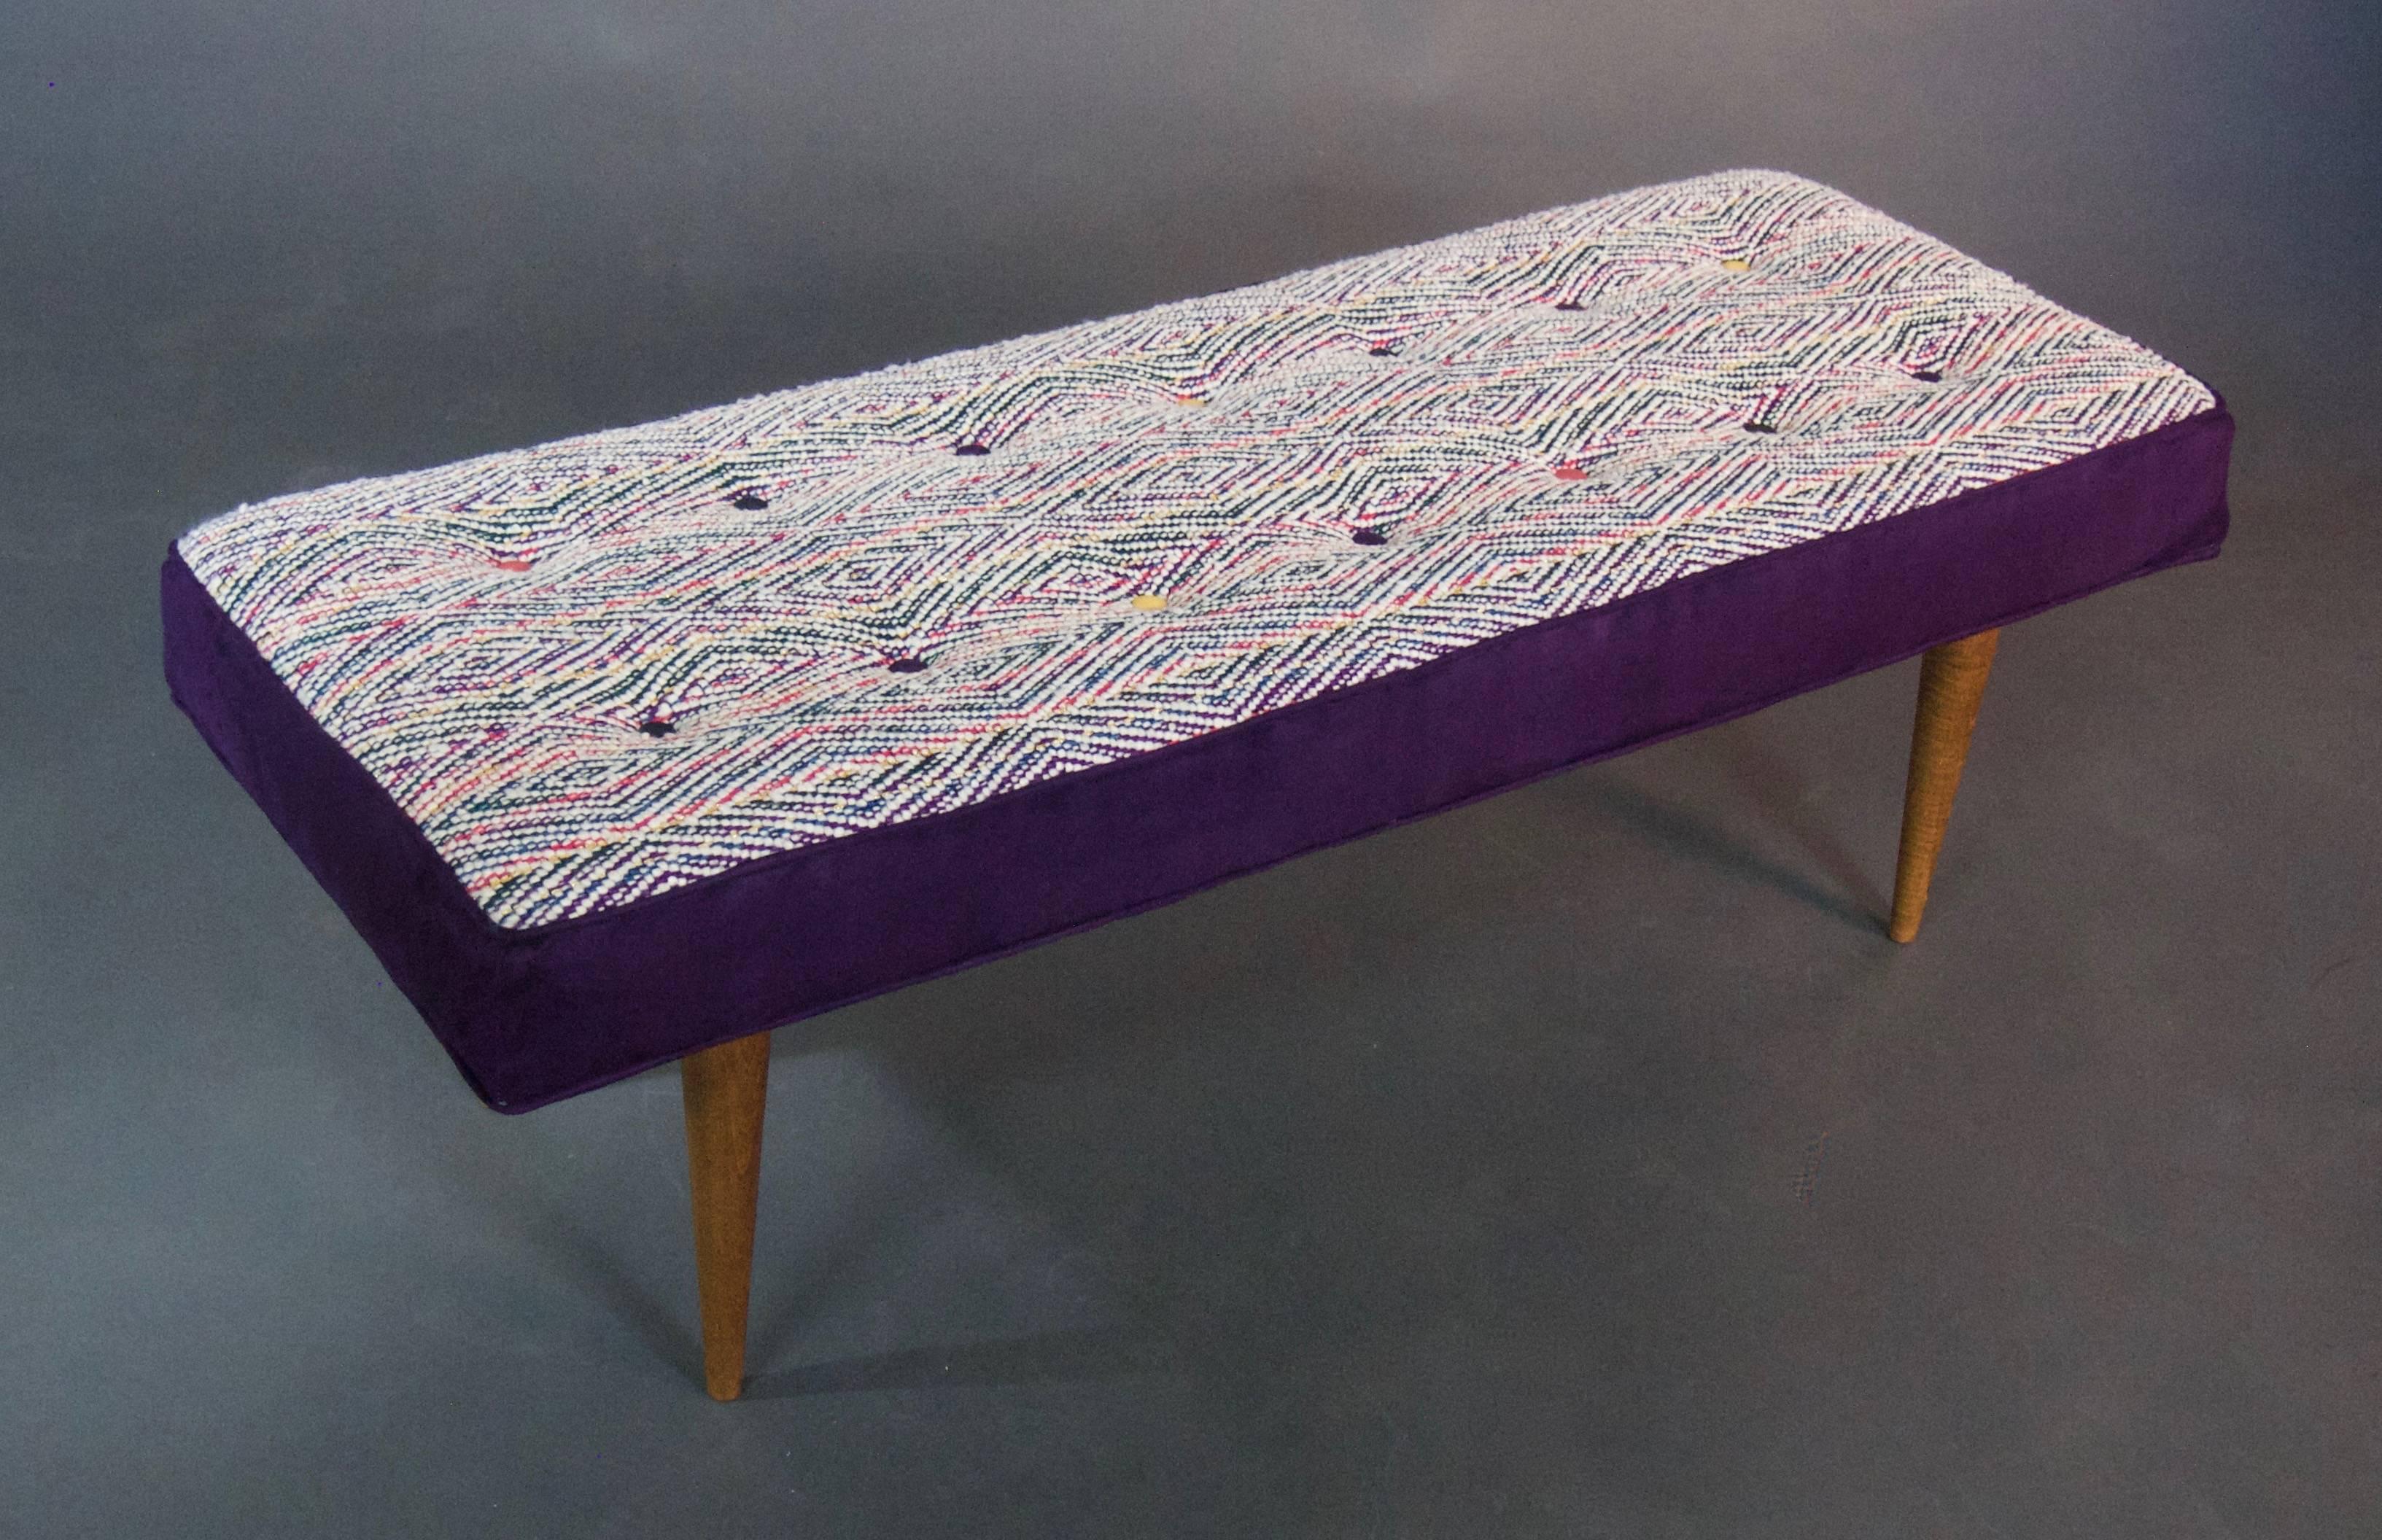 This new addition to our line of 14-button benches includes a seat fabric that's been hand-woven just for us! The fabric is inspired by a 1950's Chanel suit fabric, but carries a very unique diamond pattern in the weave. Buttons are complementary